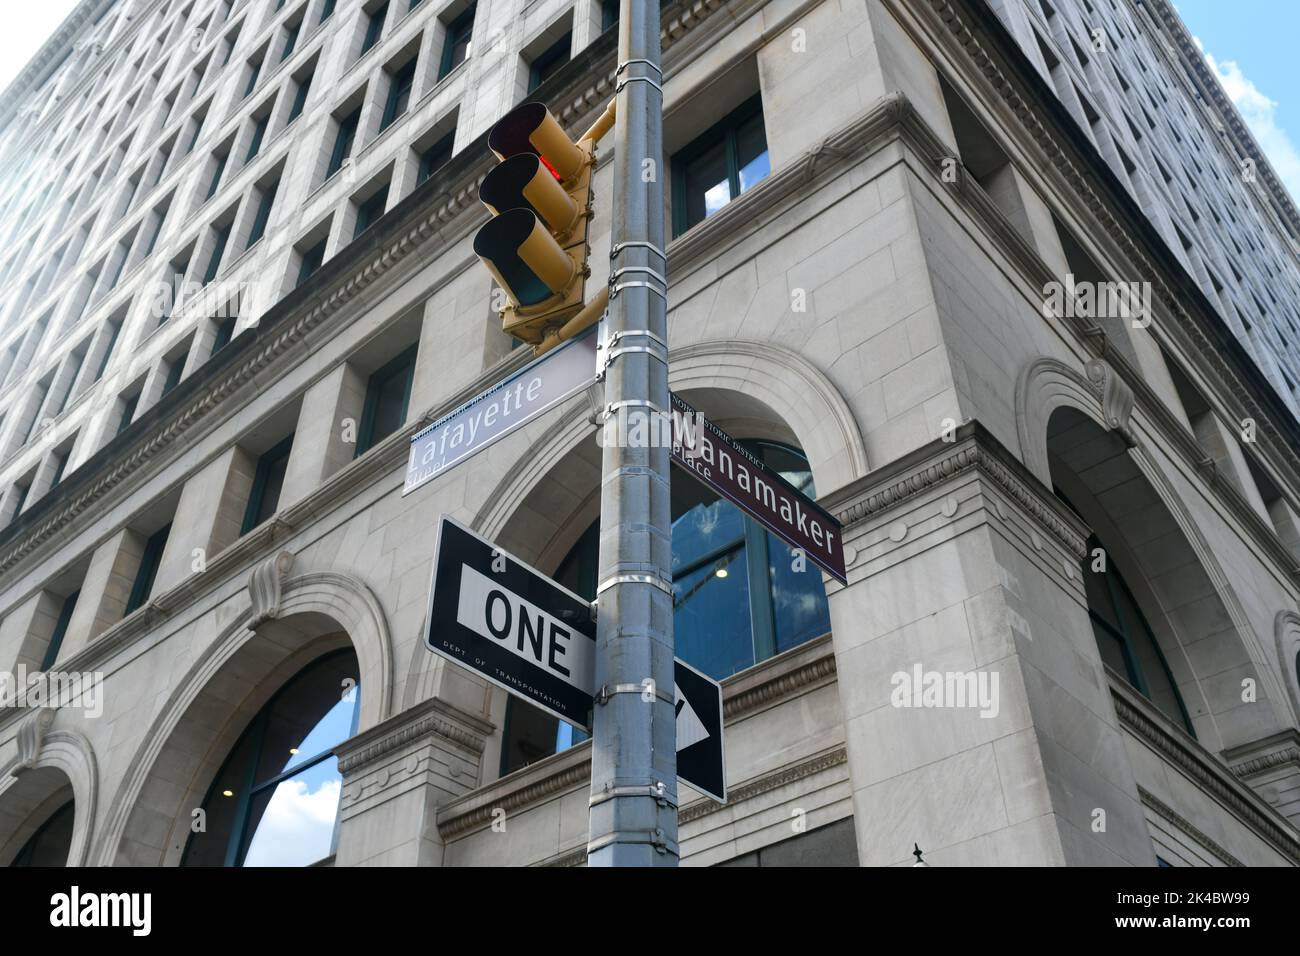 Lafayette Street and Wanamaker Place intersection street signs in the NoHo neighborhood of New York City. Stock Photo